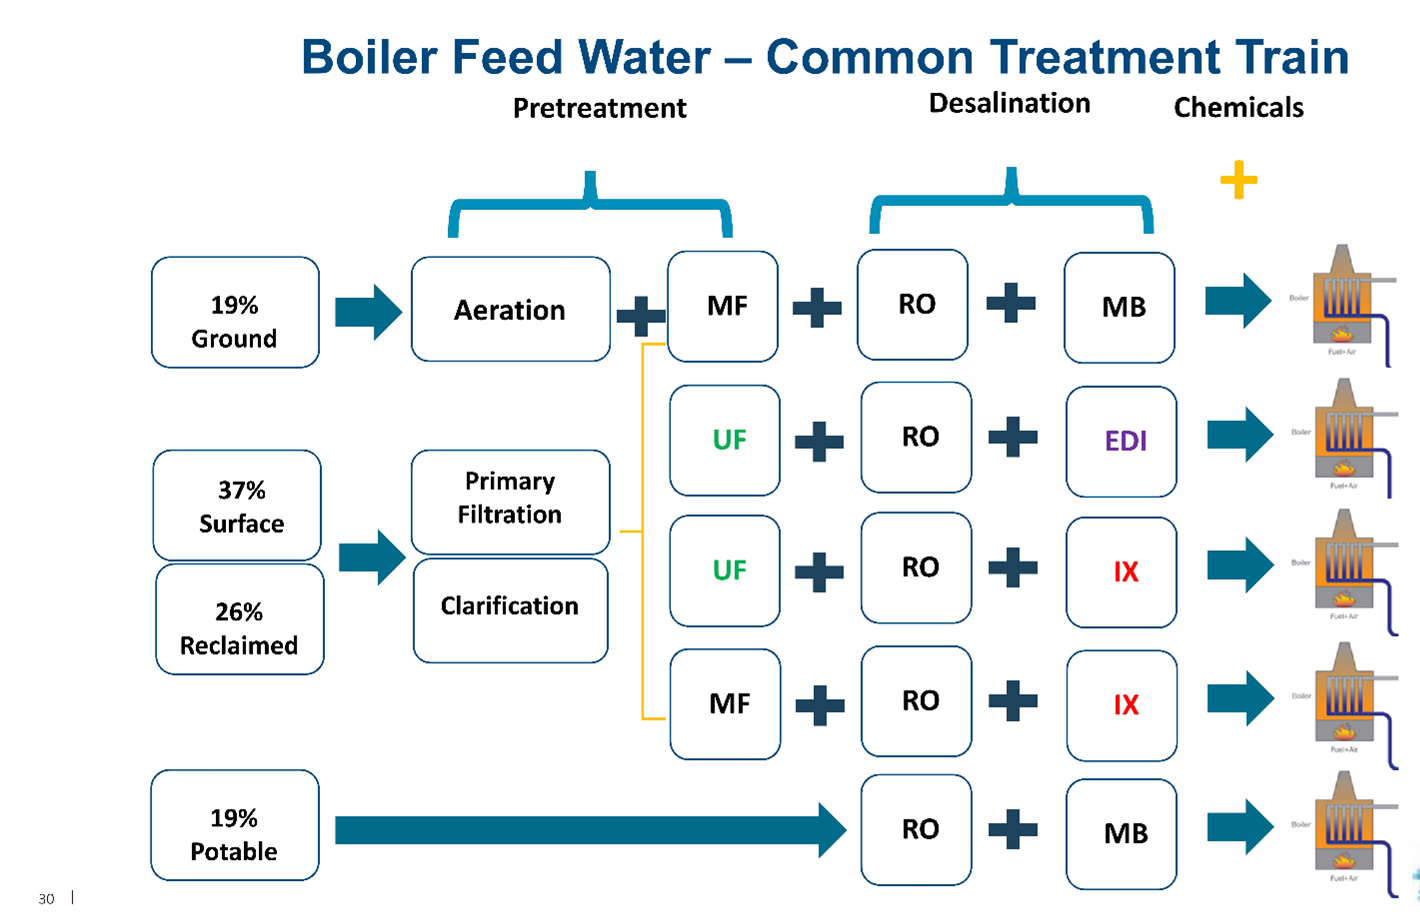 Typical Treatment Trains for Treatment of Boiler Feed/Makeup